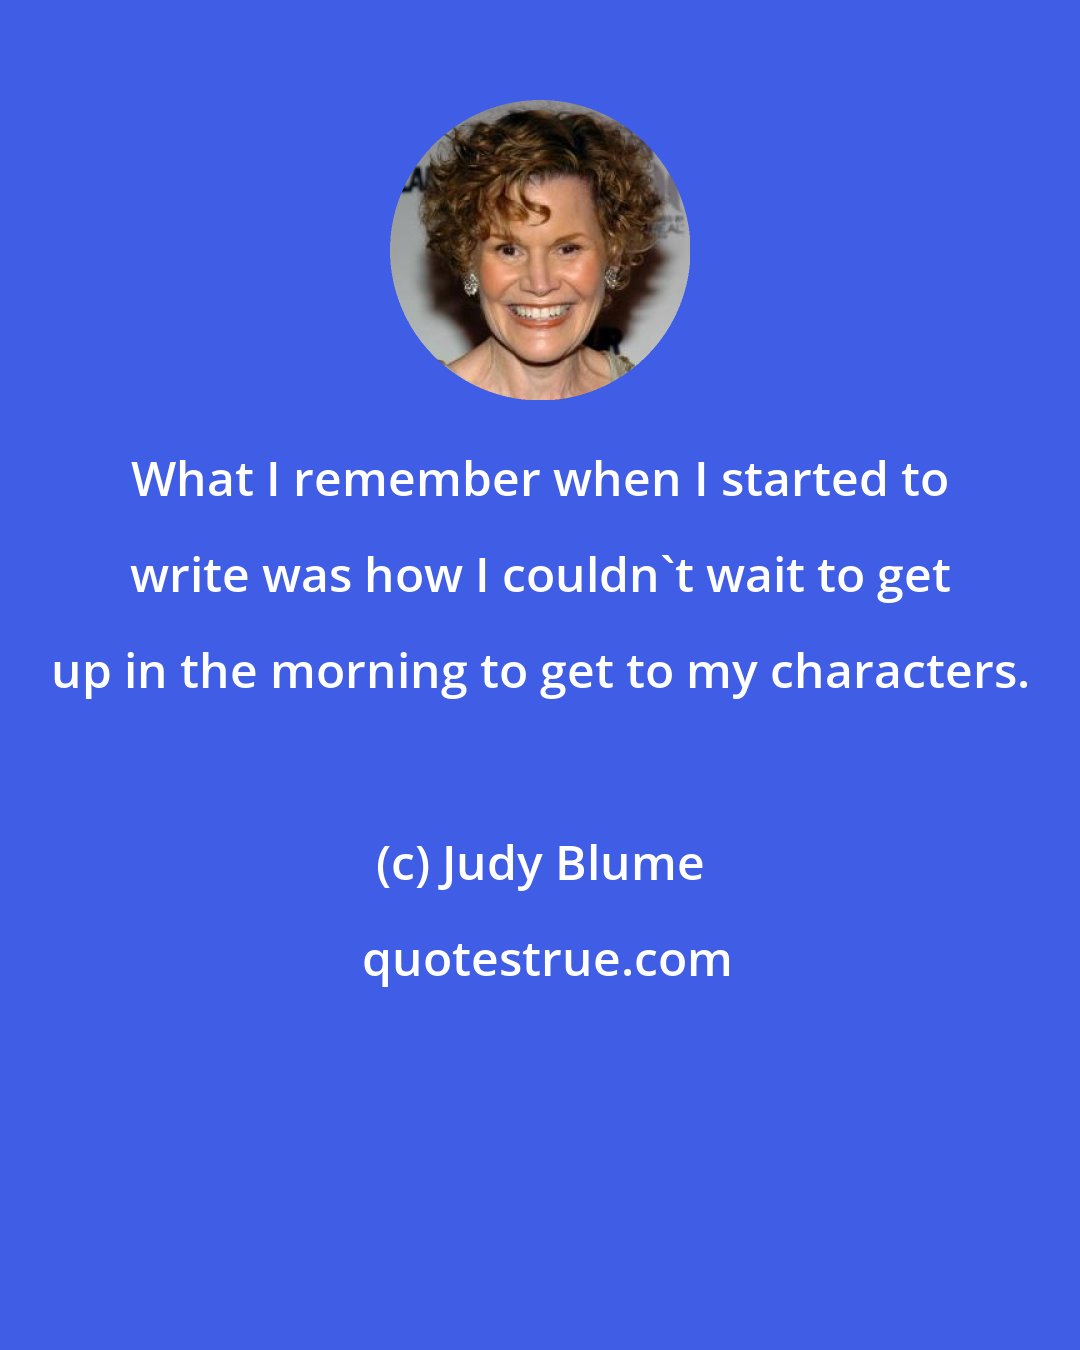 Judy Blume: What I remember when I started to write was how I couldn't wait to get up in the morning to get to my characters.